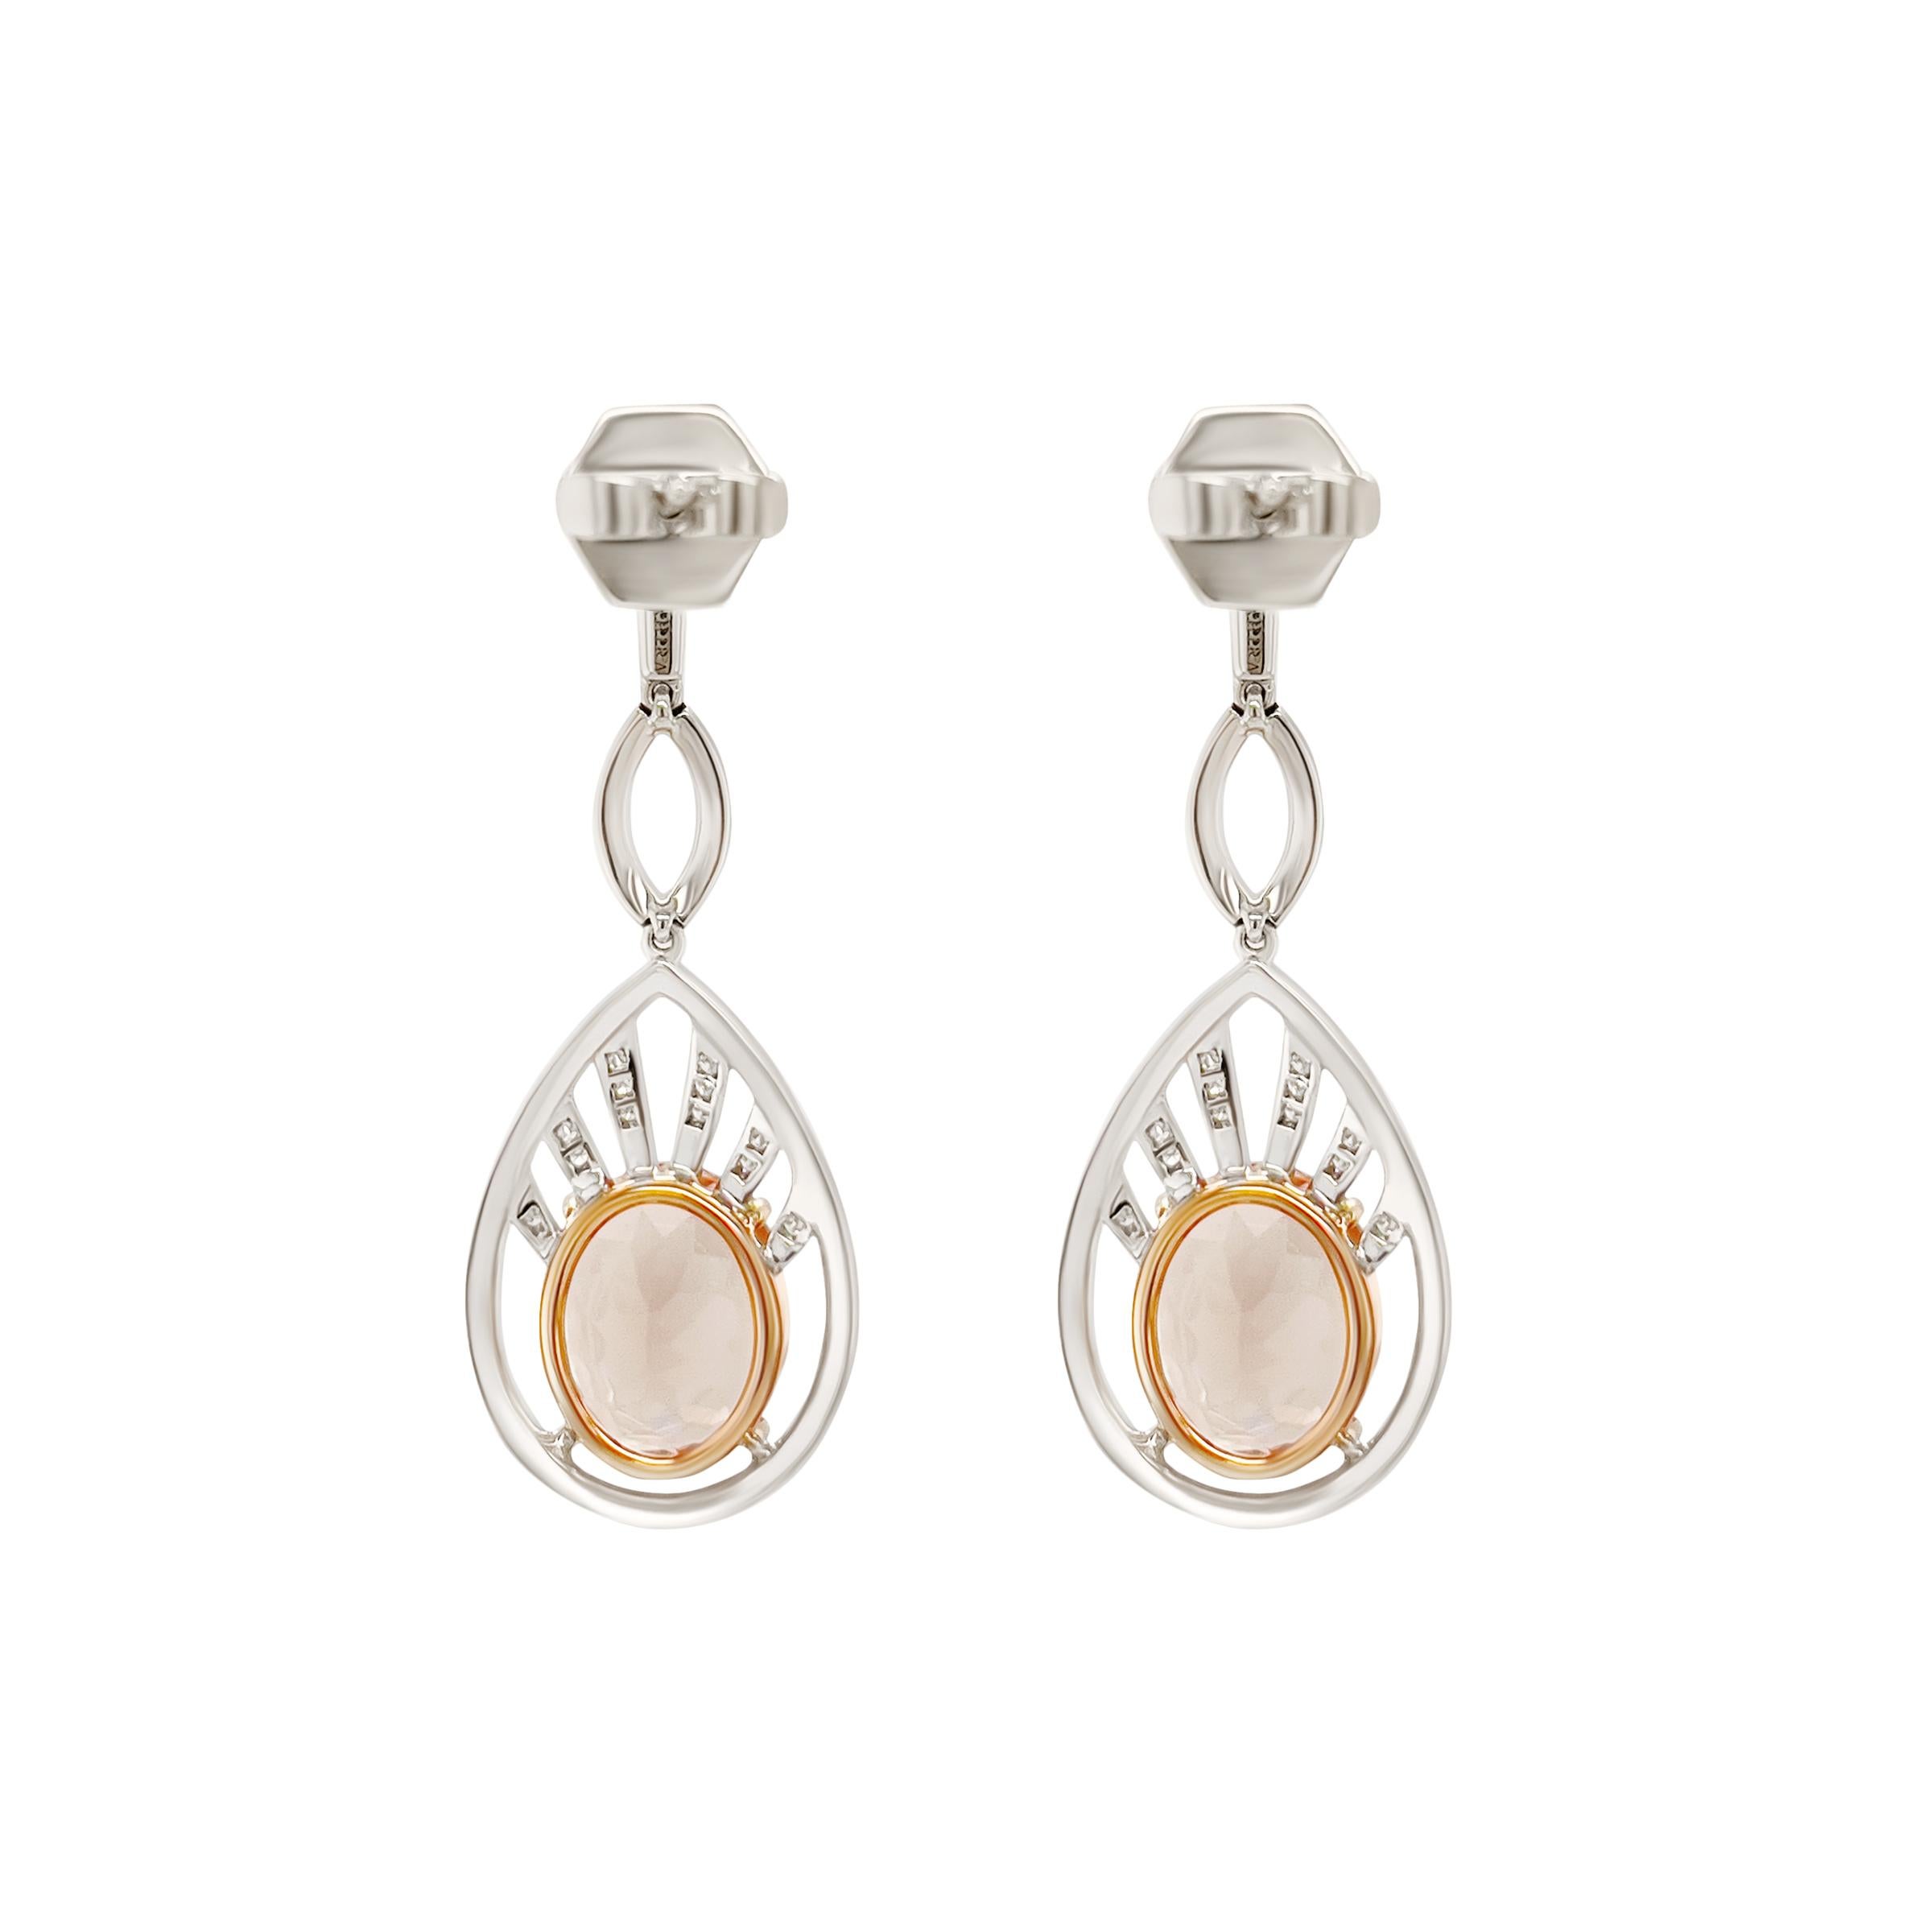 A pair of natural and loupe clean 3.45ct champagne morganites are the center-stones of these dazzling earrings.  Pave'd diamonds surround the morganite totalling .50 cts of G VS diamonds. These earrings were made for movement and is set in 18k white